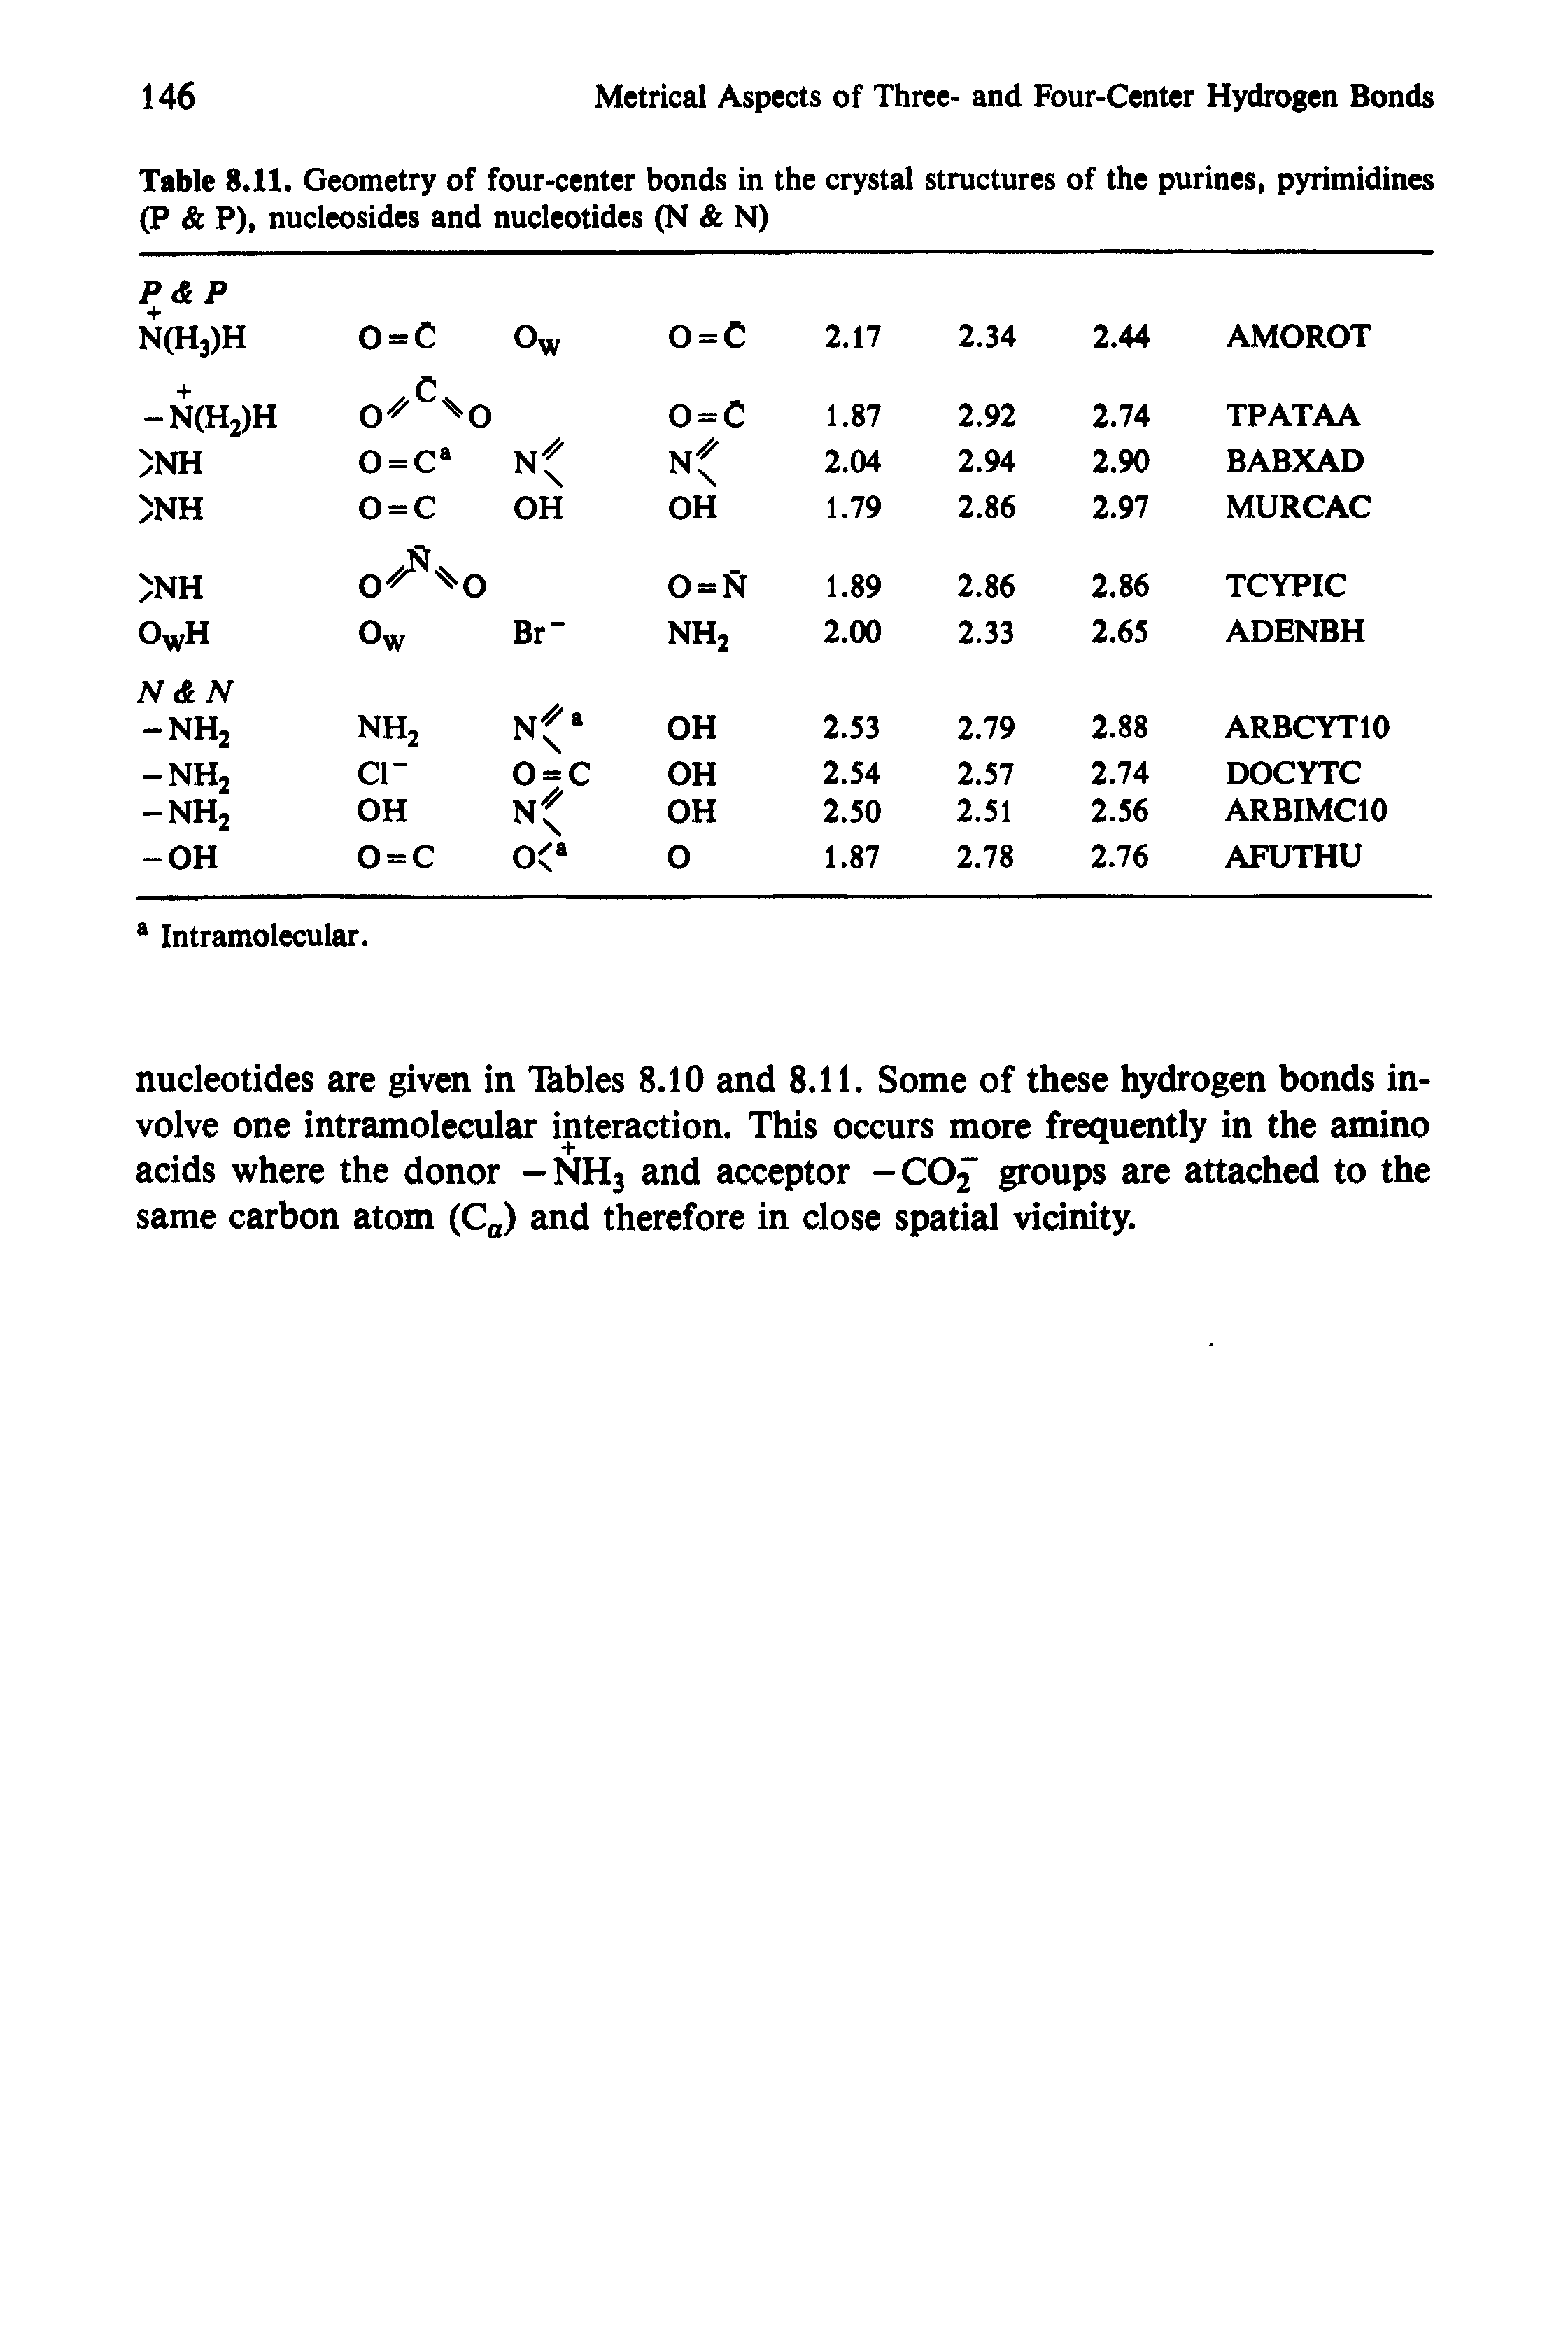 Table 8.11. Geometry of four-center bonds in the crystal structures of the purines, pyrimidines (P P), nucleosides and nucleotides (N N)...